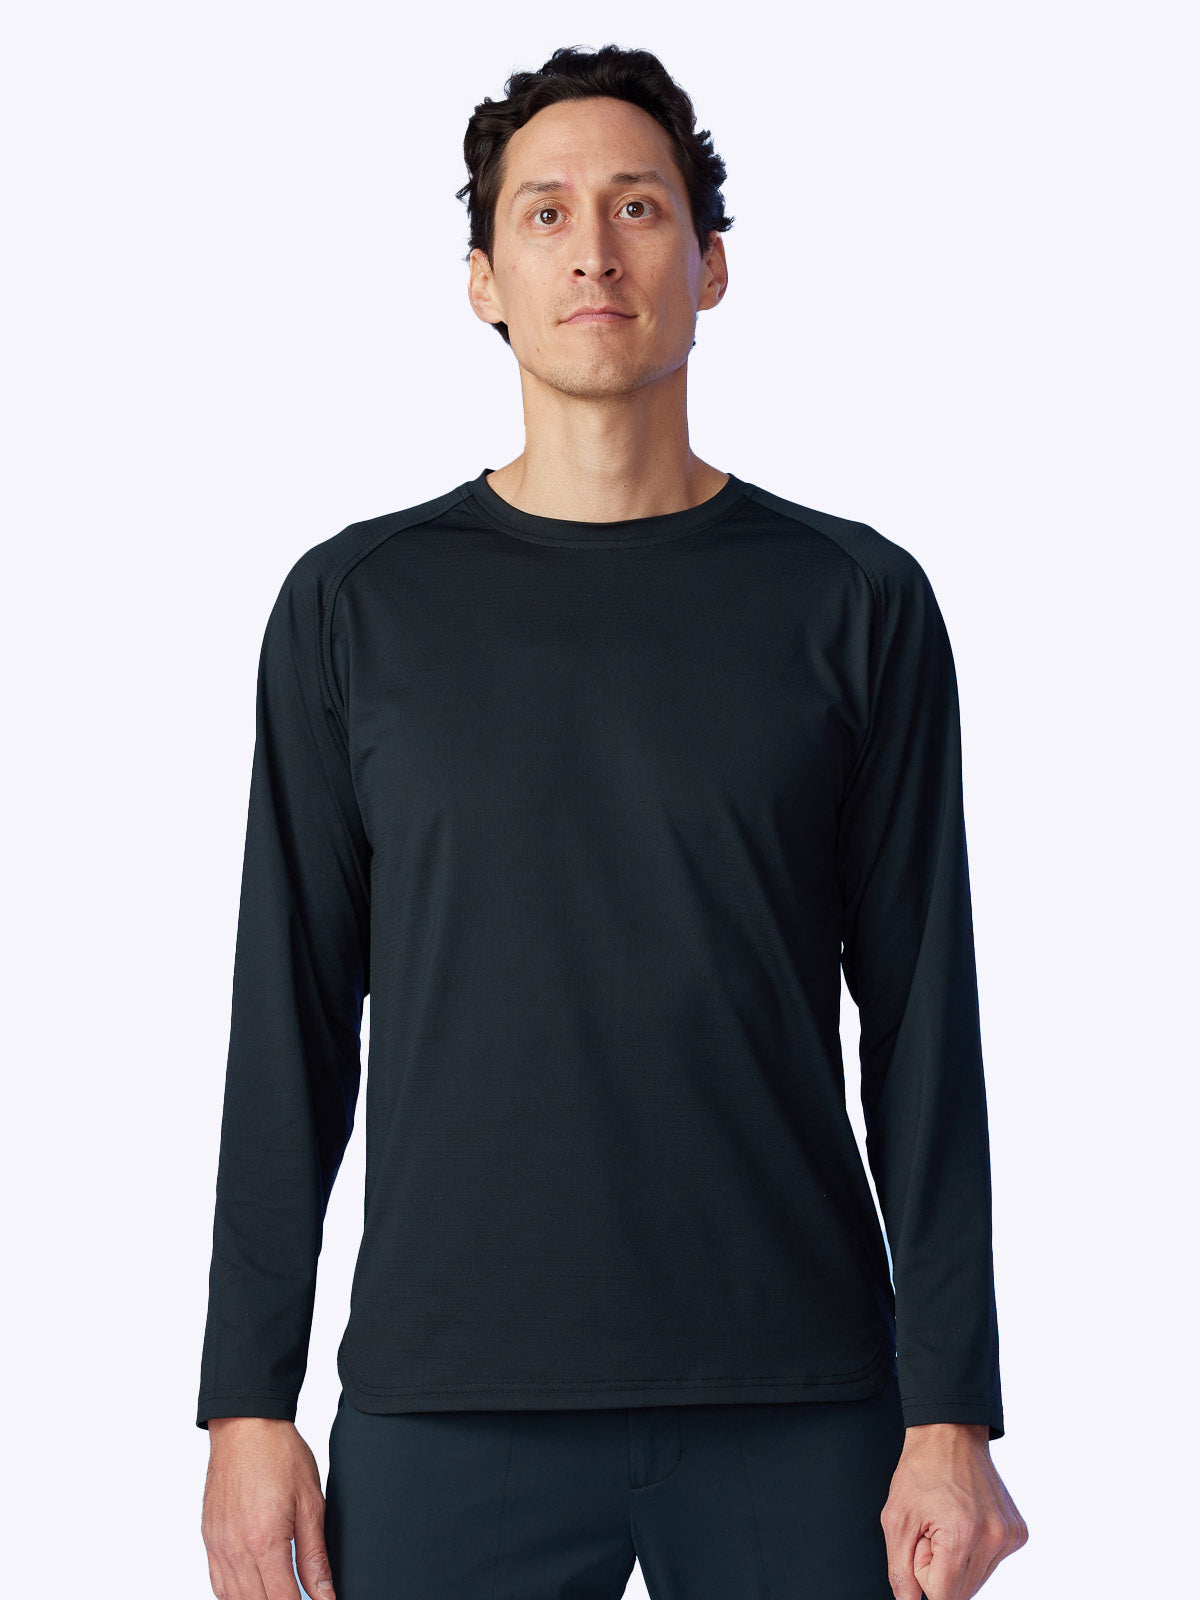 Close-up detailing the subtle, luxurious texture of the Seamfinity Long Sleeve Shirt in Onyx.||||Onyx